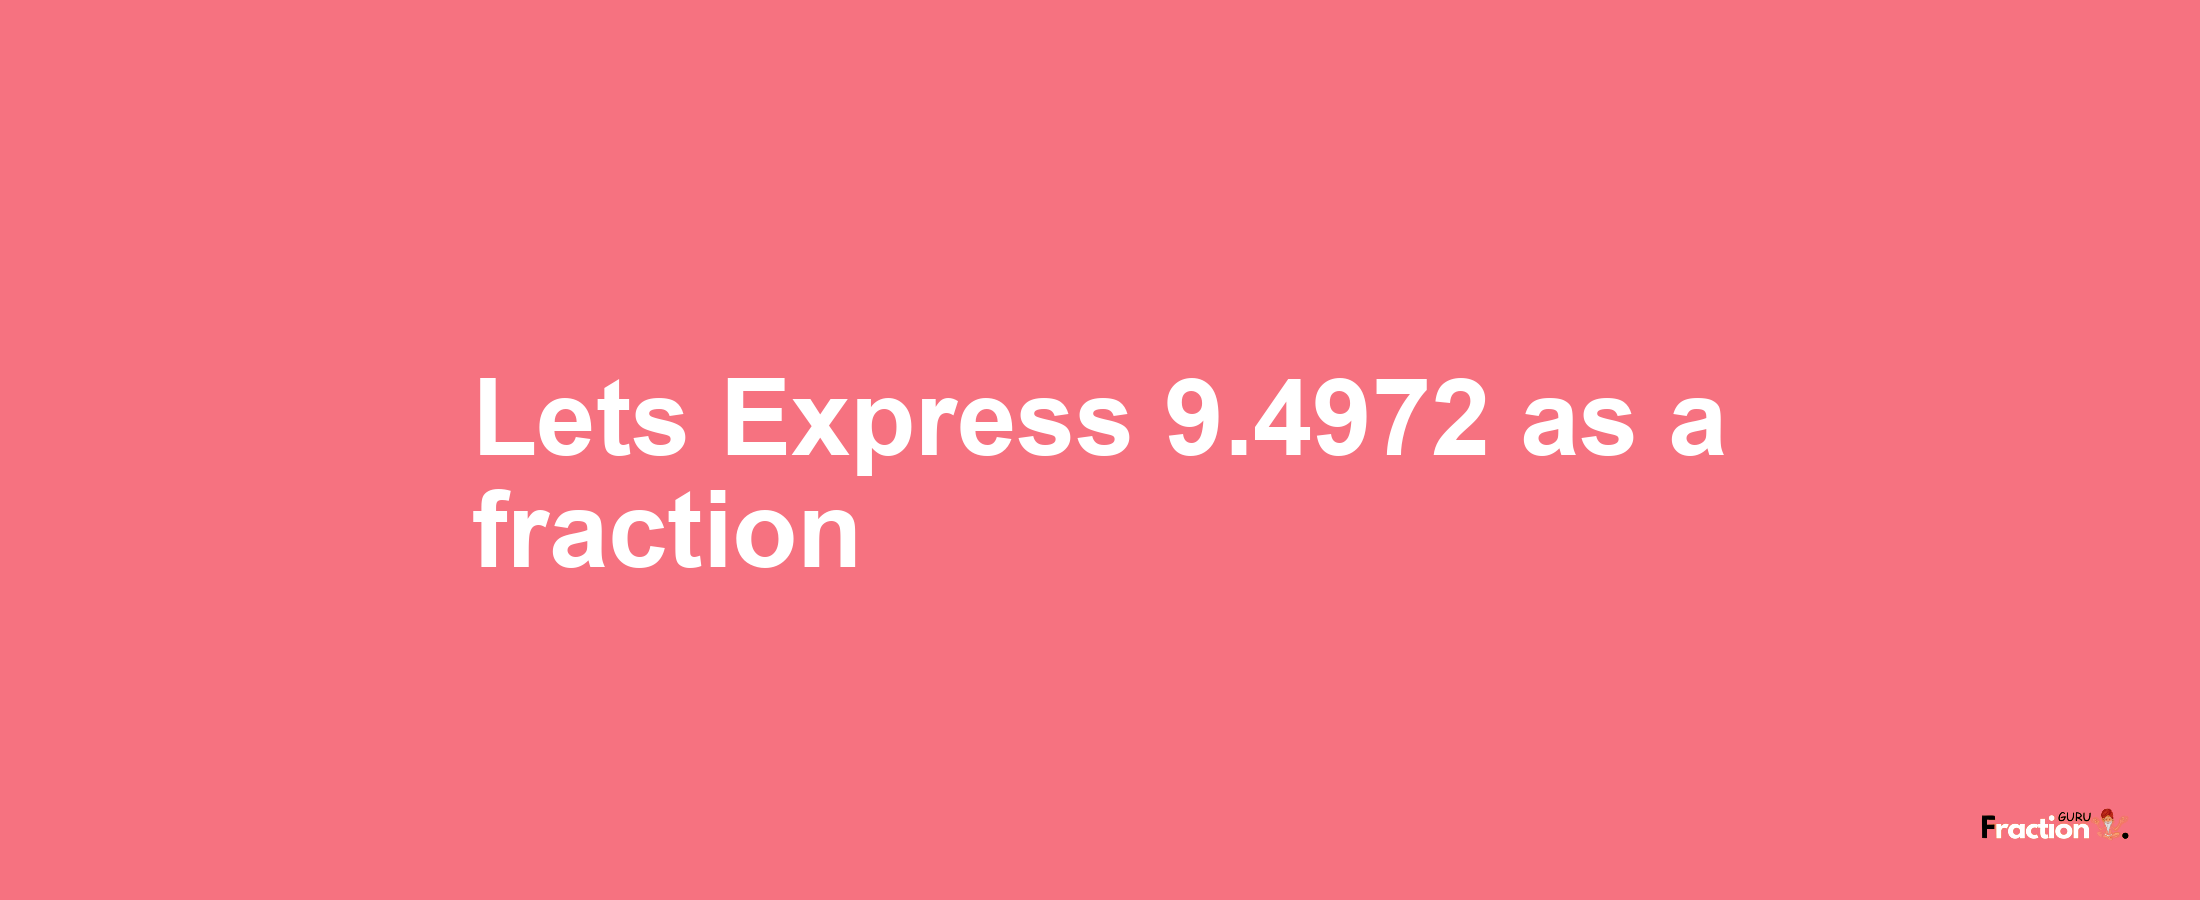 Lets Express 9.4972 as afraction